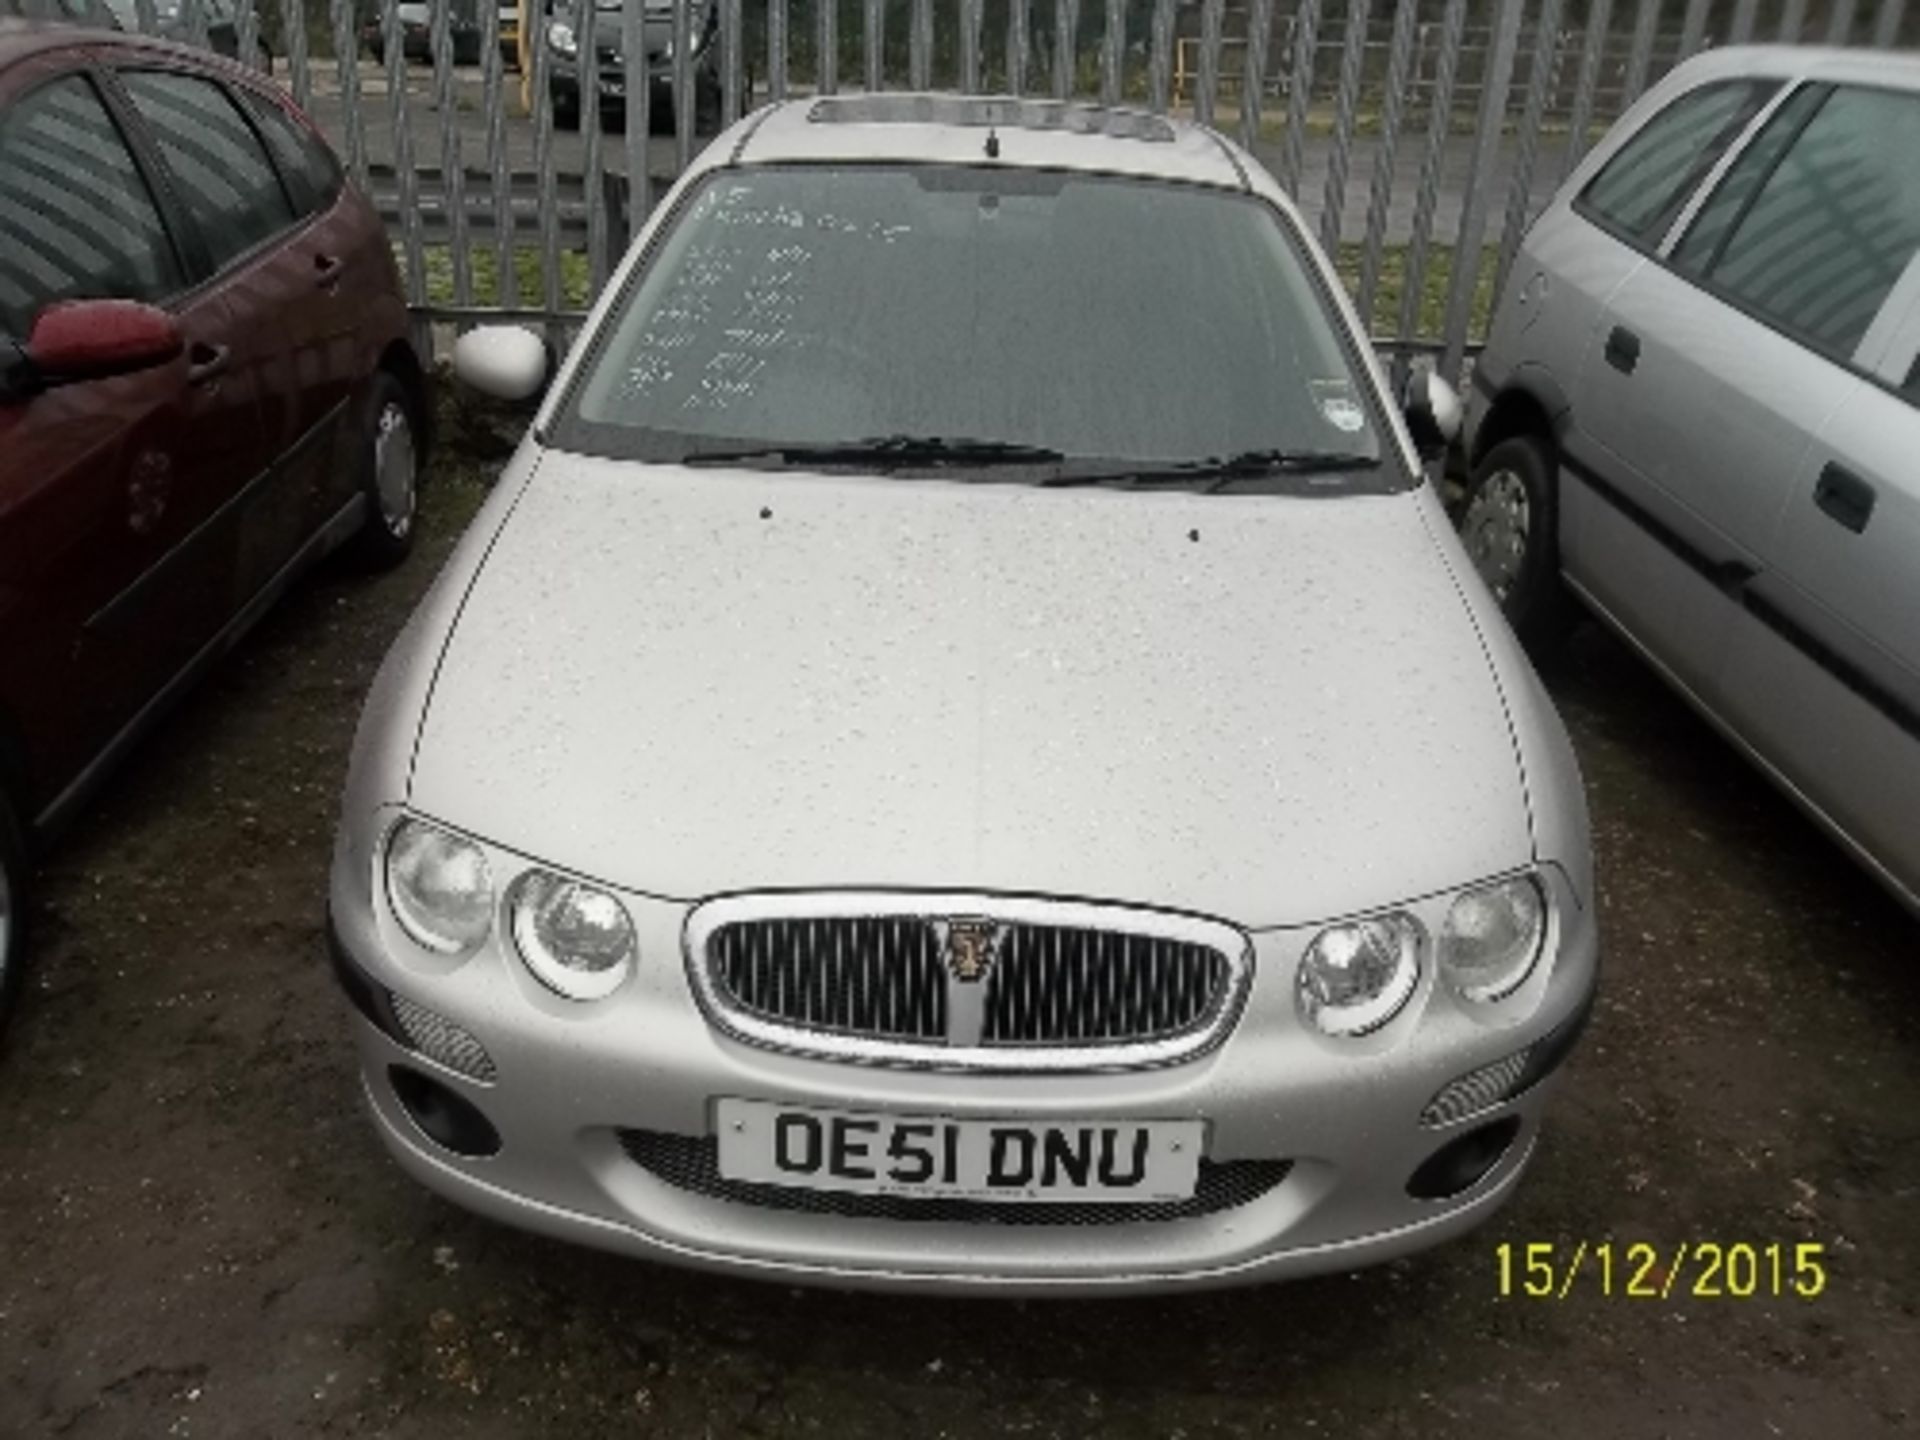 Rover 25 IXL Stepspeed - OE51 DNU Date of registration:  21.12.2001 1588cc, petrol, variable speed